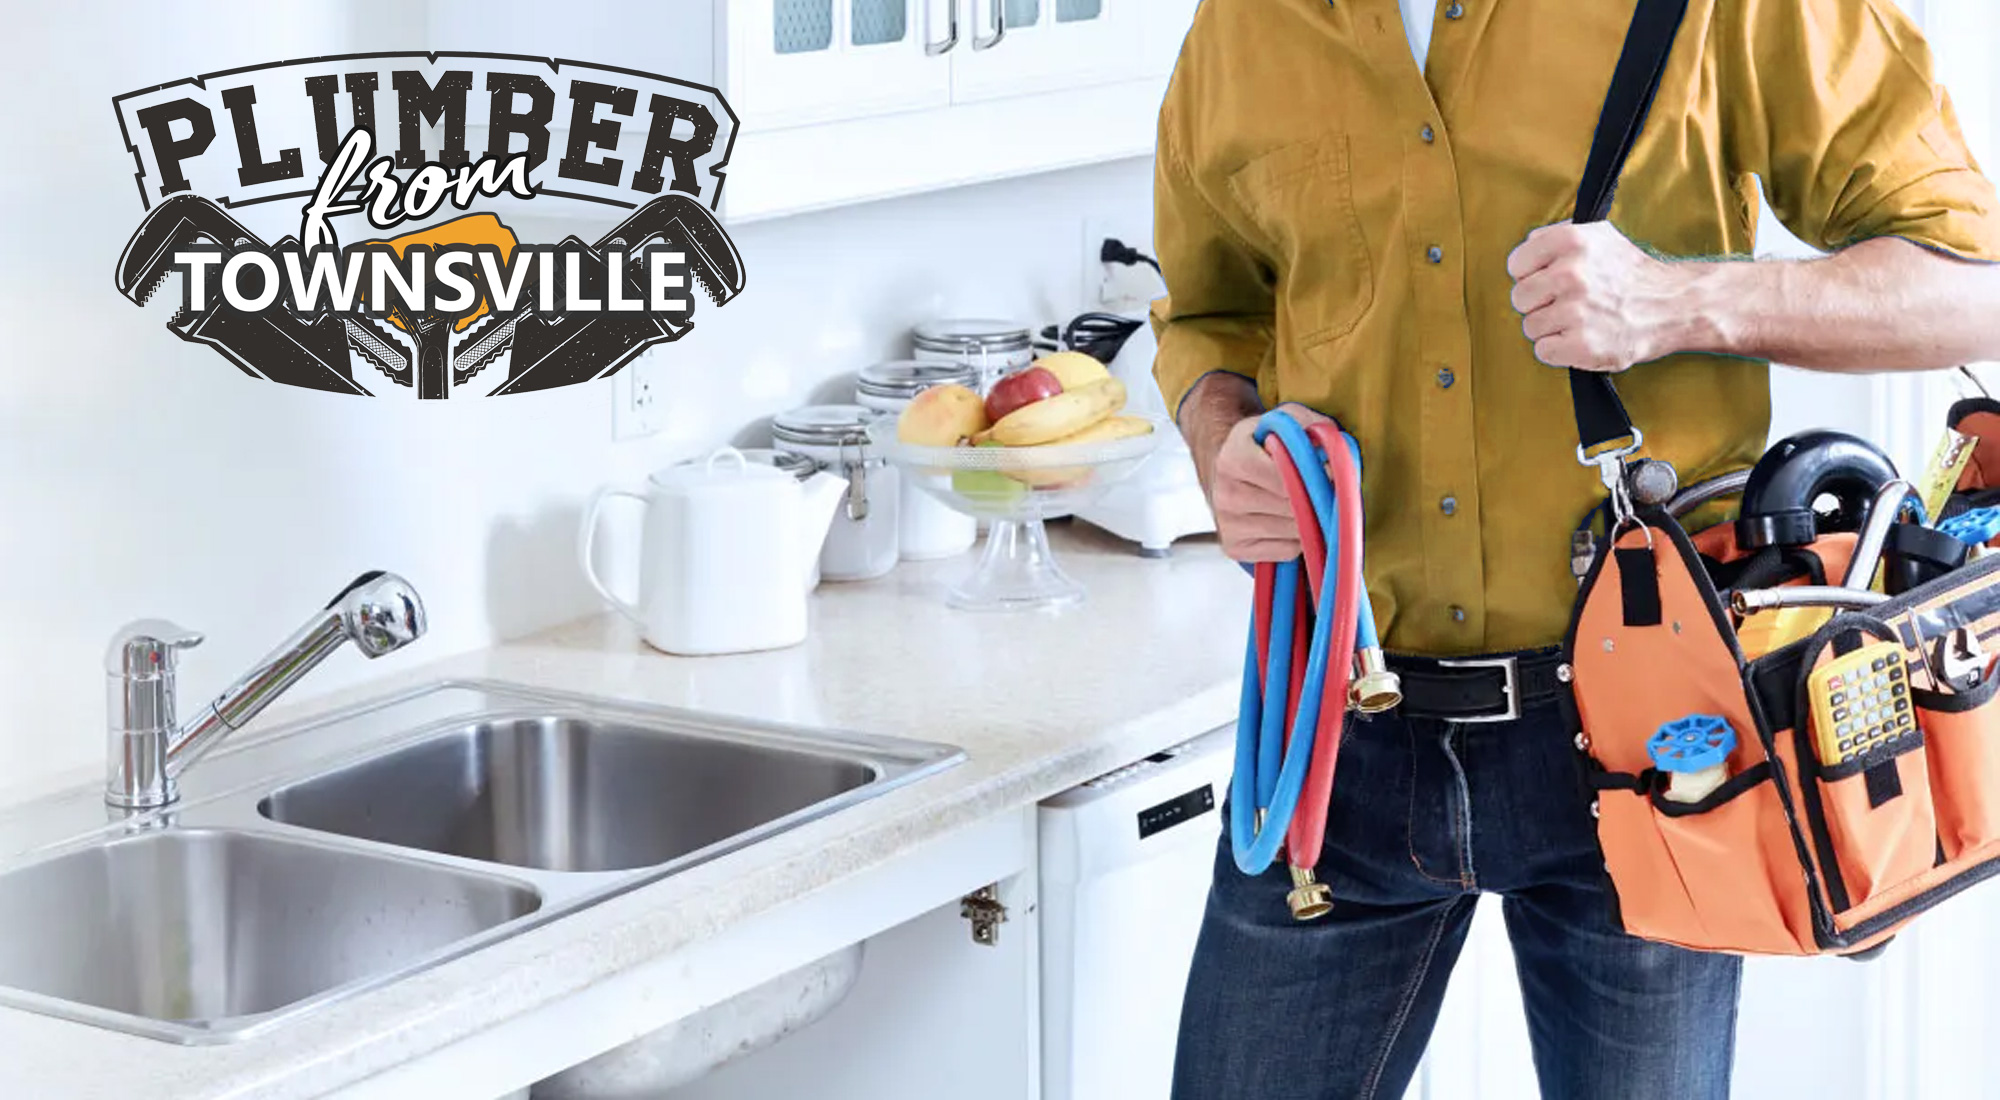 Plumber From Townsville - Emergency Plumbing Services in Townsville Region